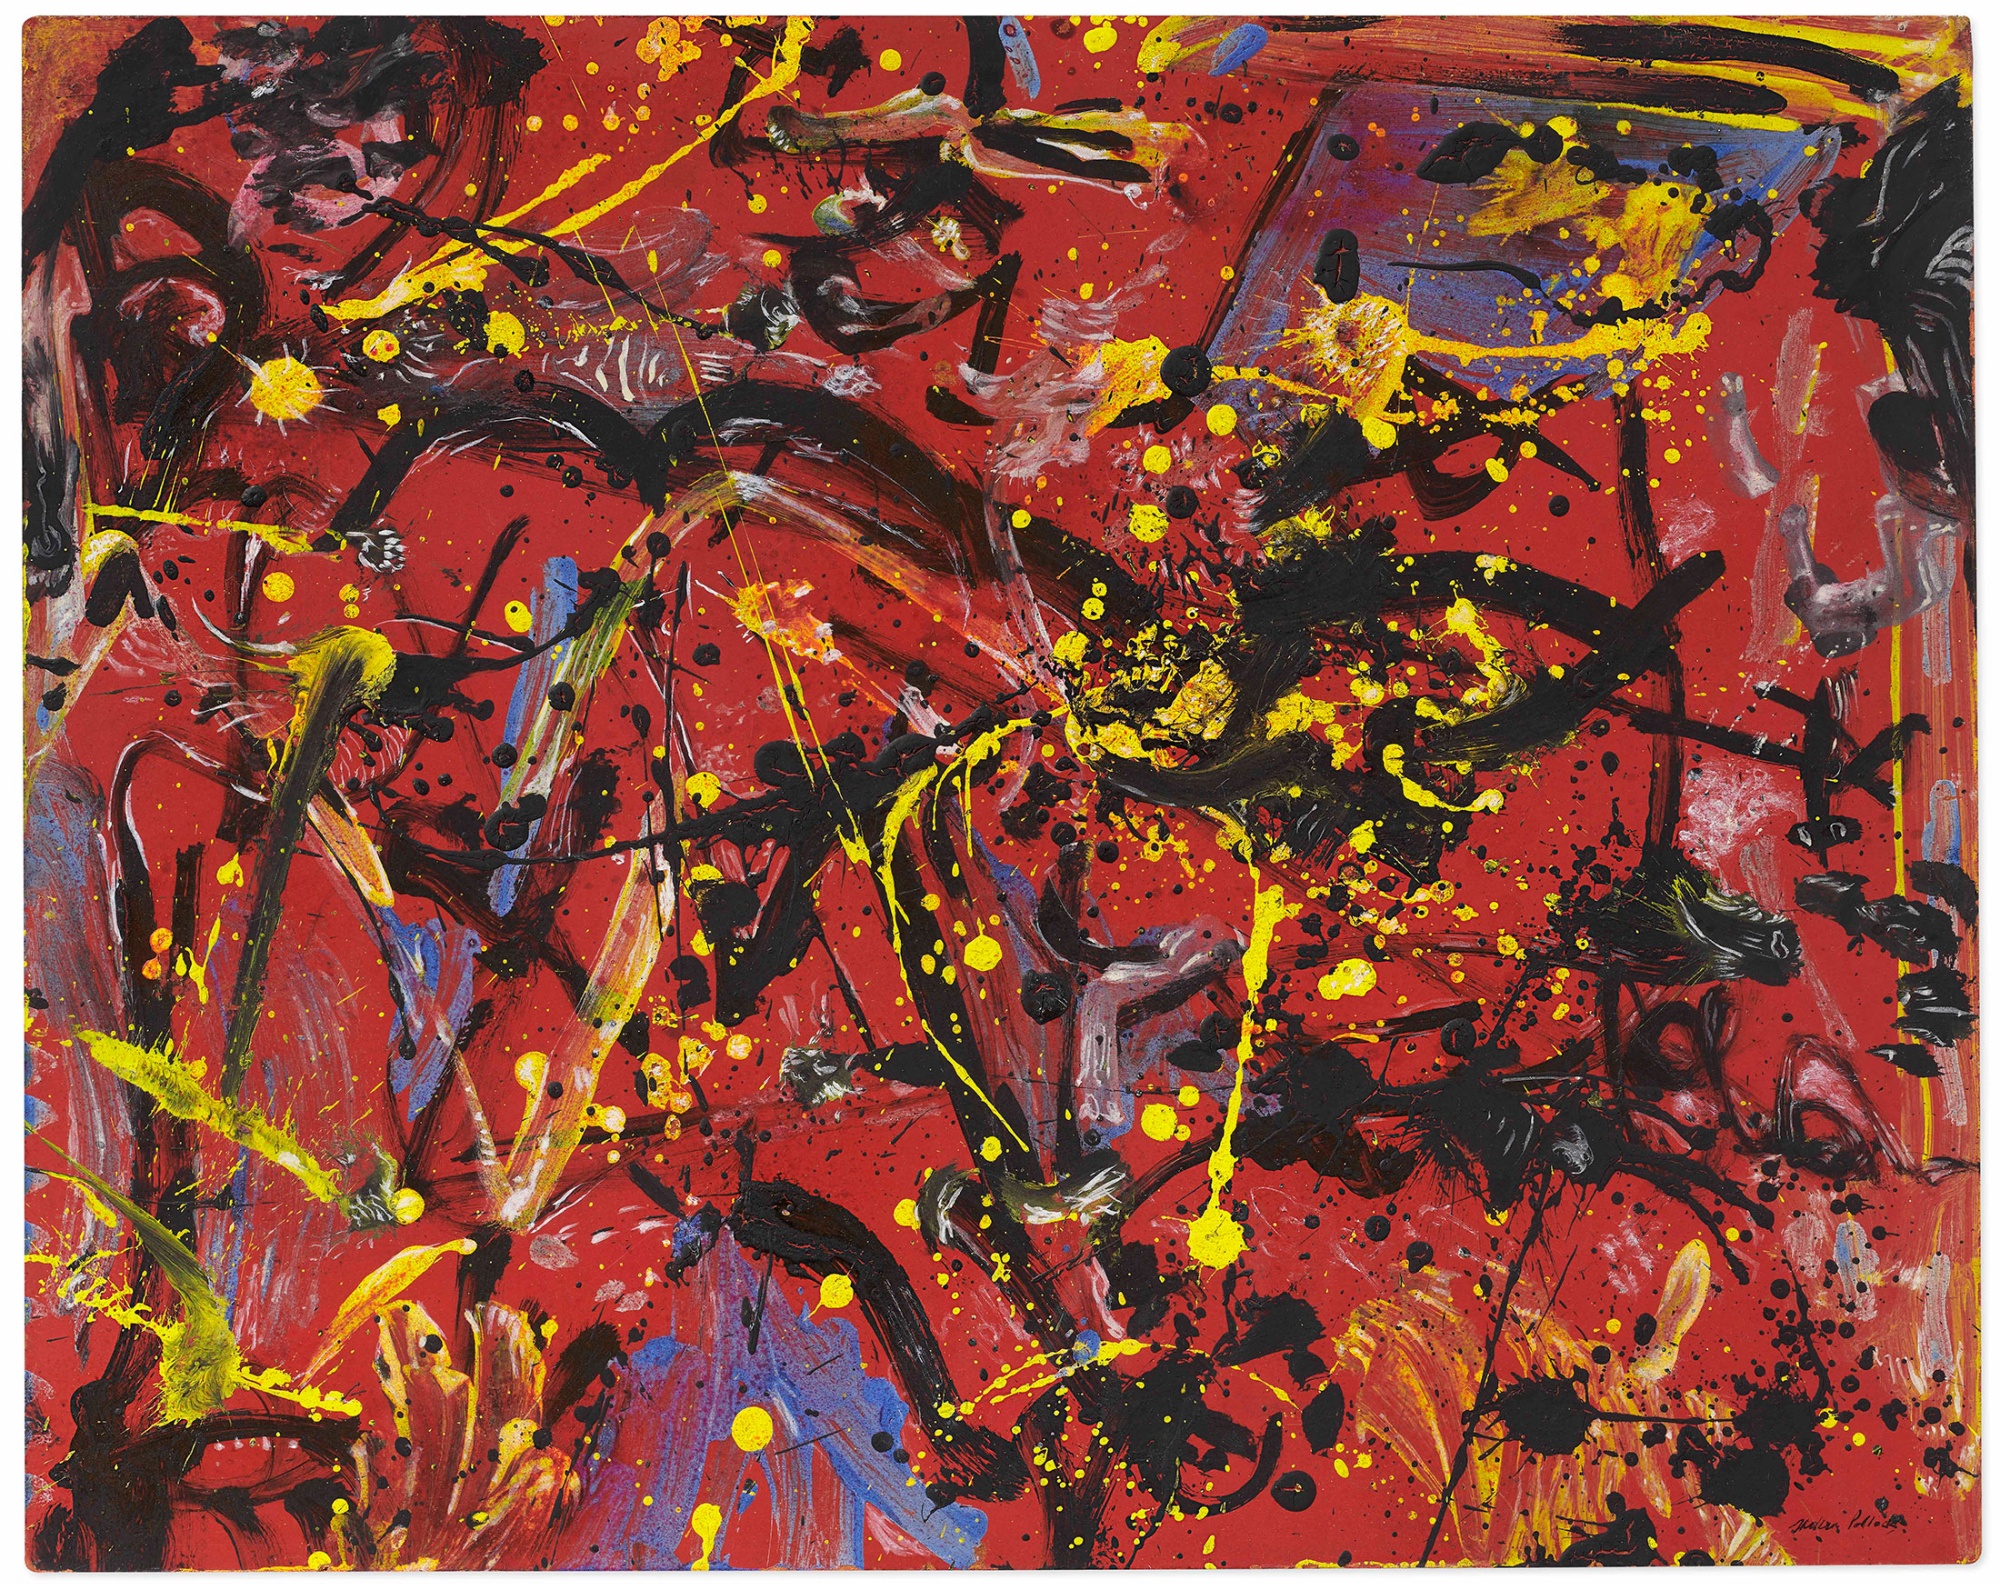 Jackson Pollock “Red Composition”